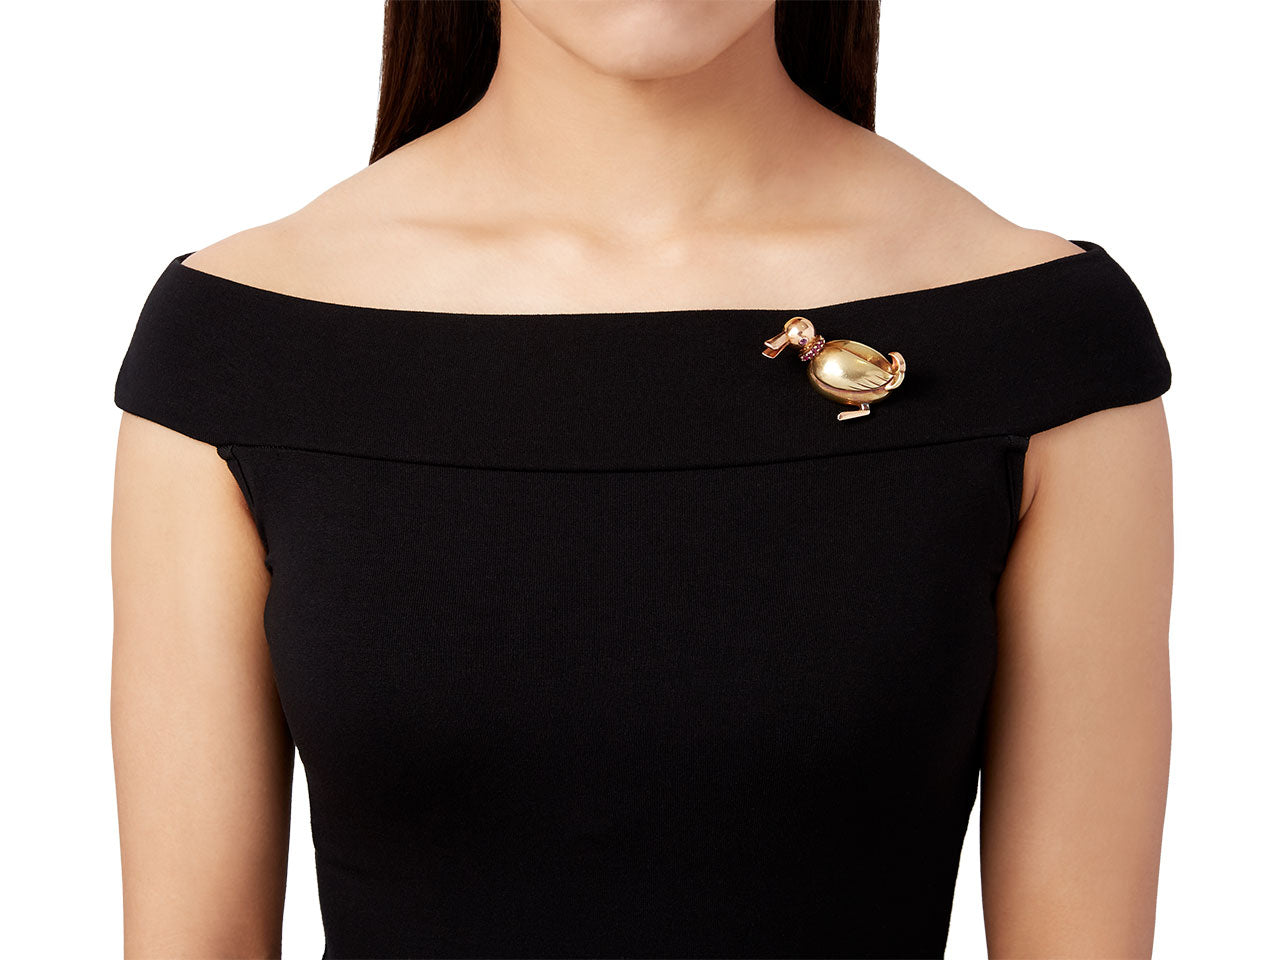 Retro Ruby Duck Pin in 14K Yellow and Rose Gold